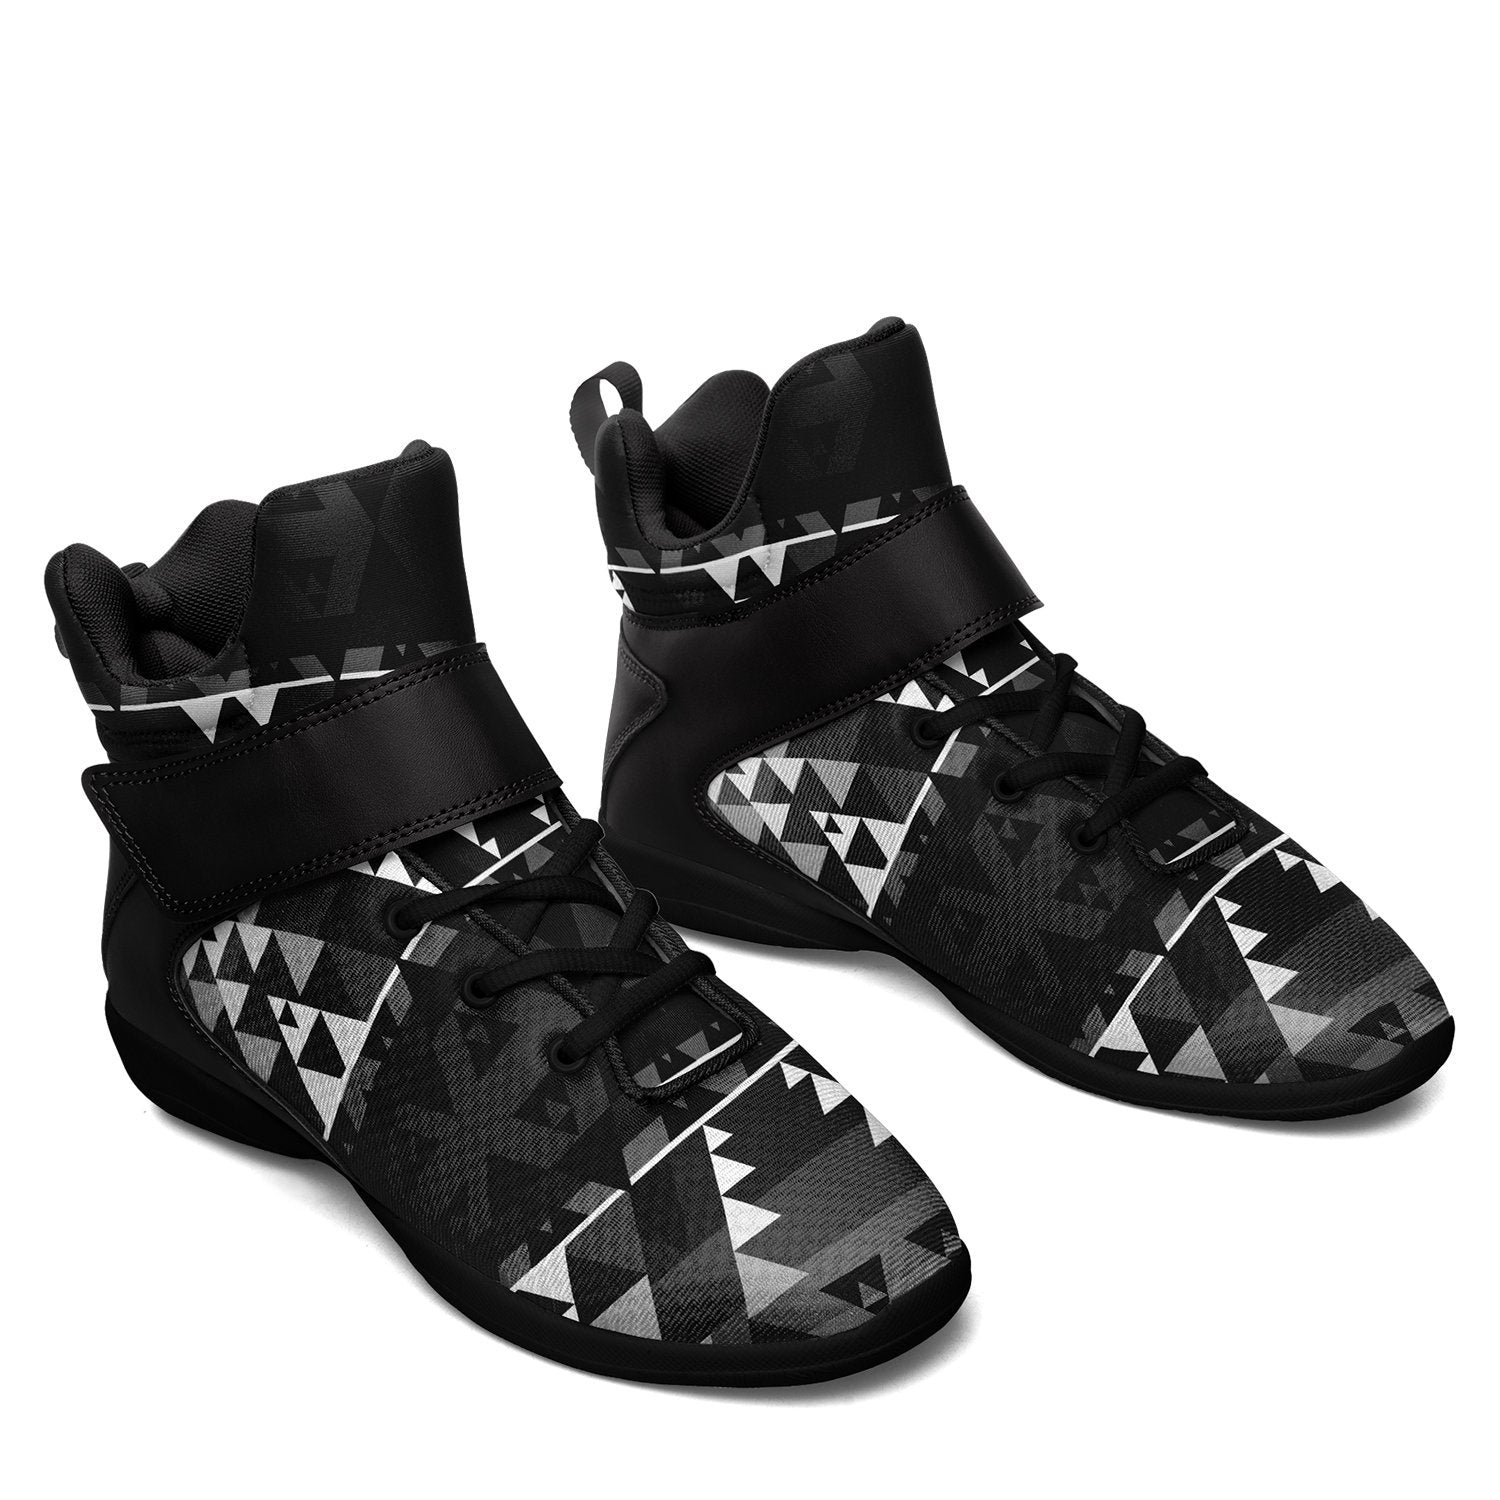 Writing on Stone Black and White Kid's Ipottaa Basketball / Sport High Top Shoes 49 Dzine 